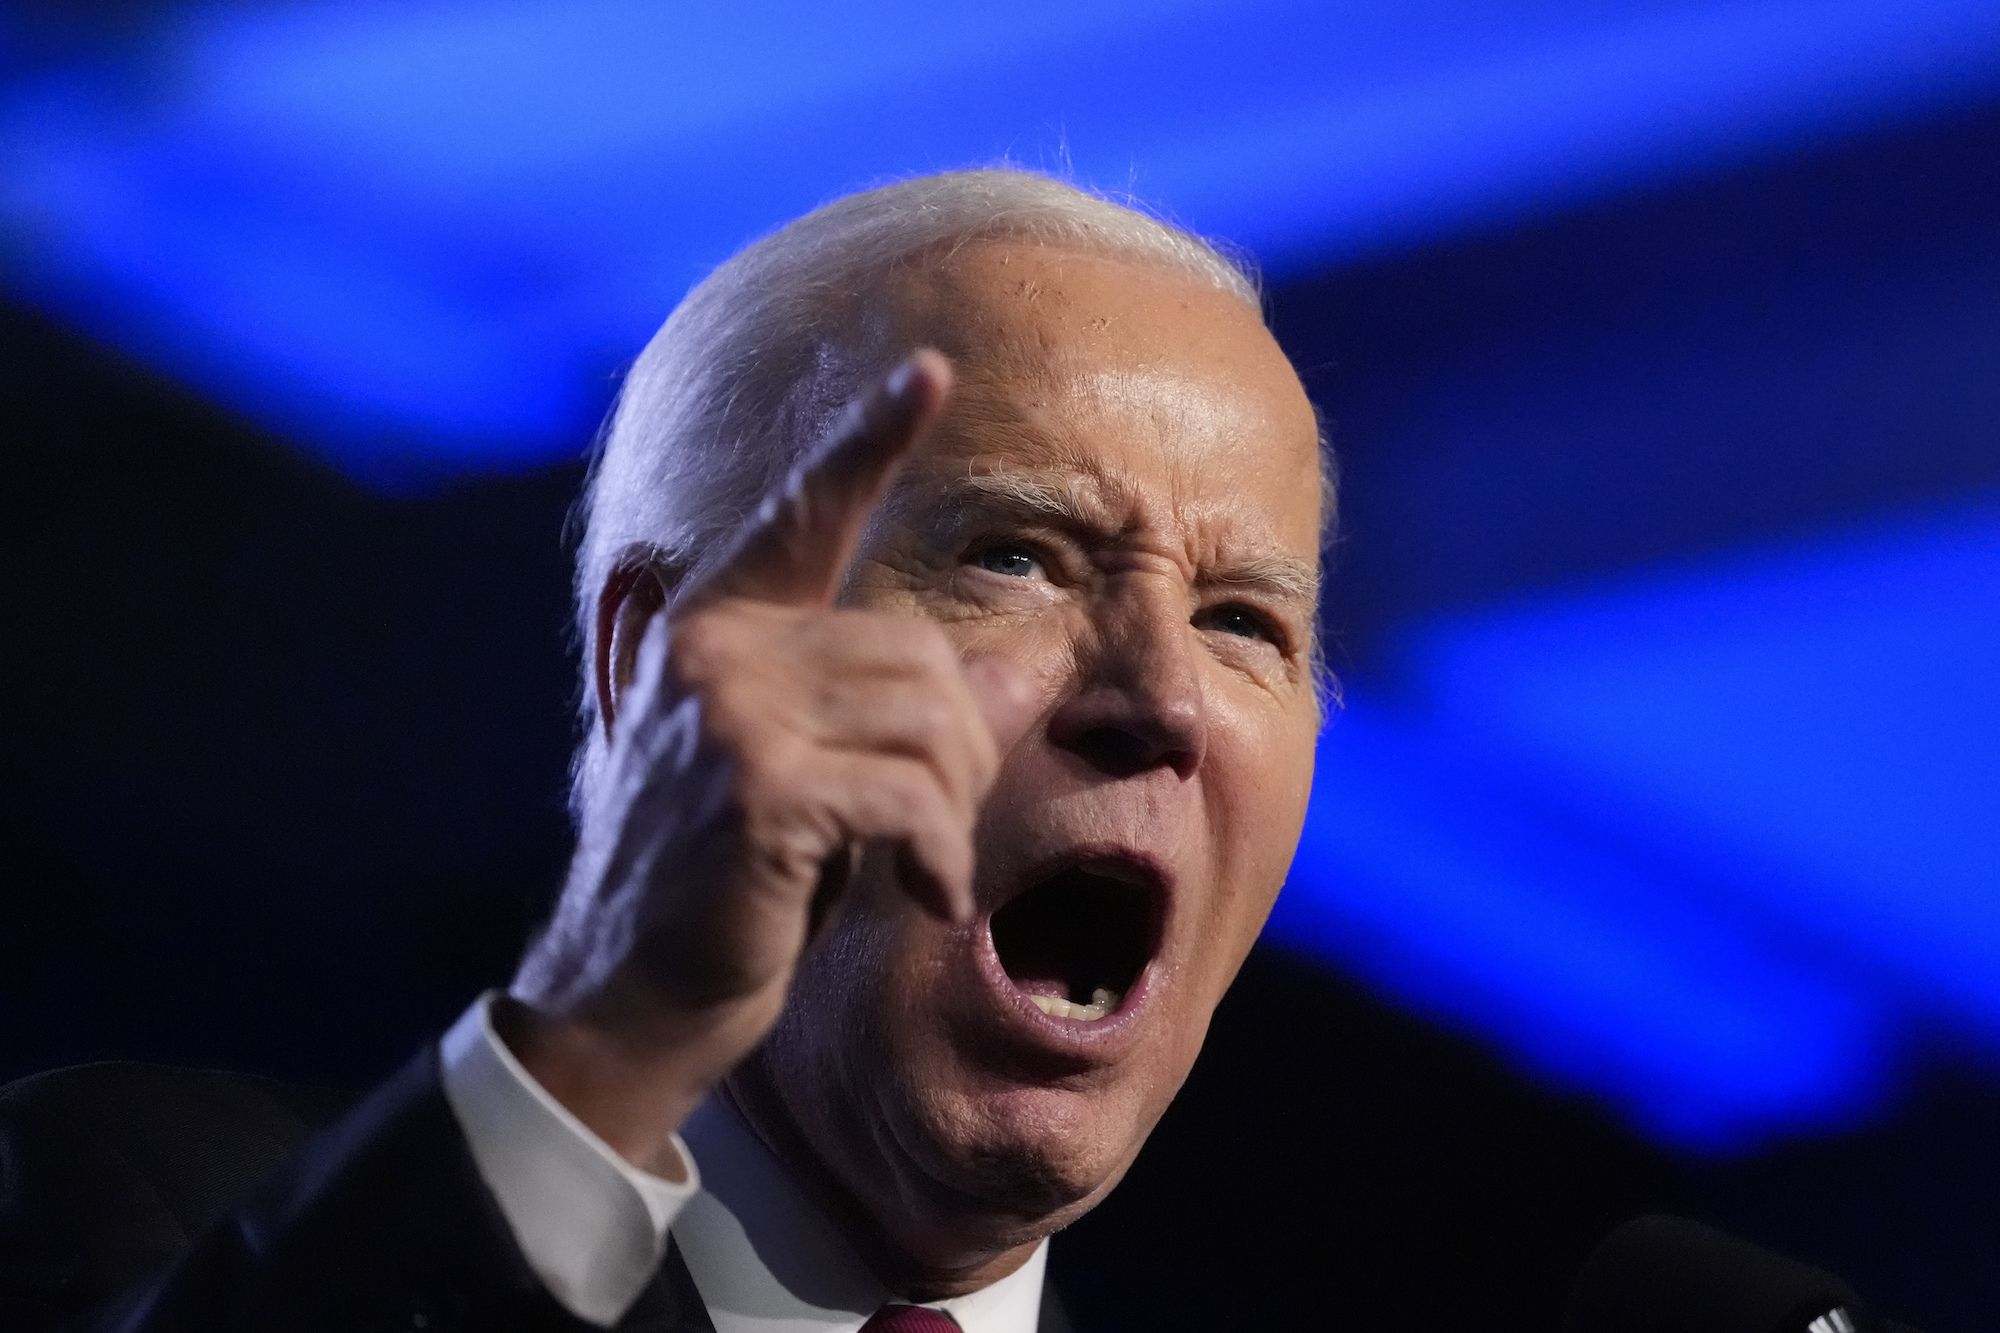 Biden needles Trump in hopes of pushing him off message